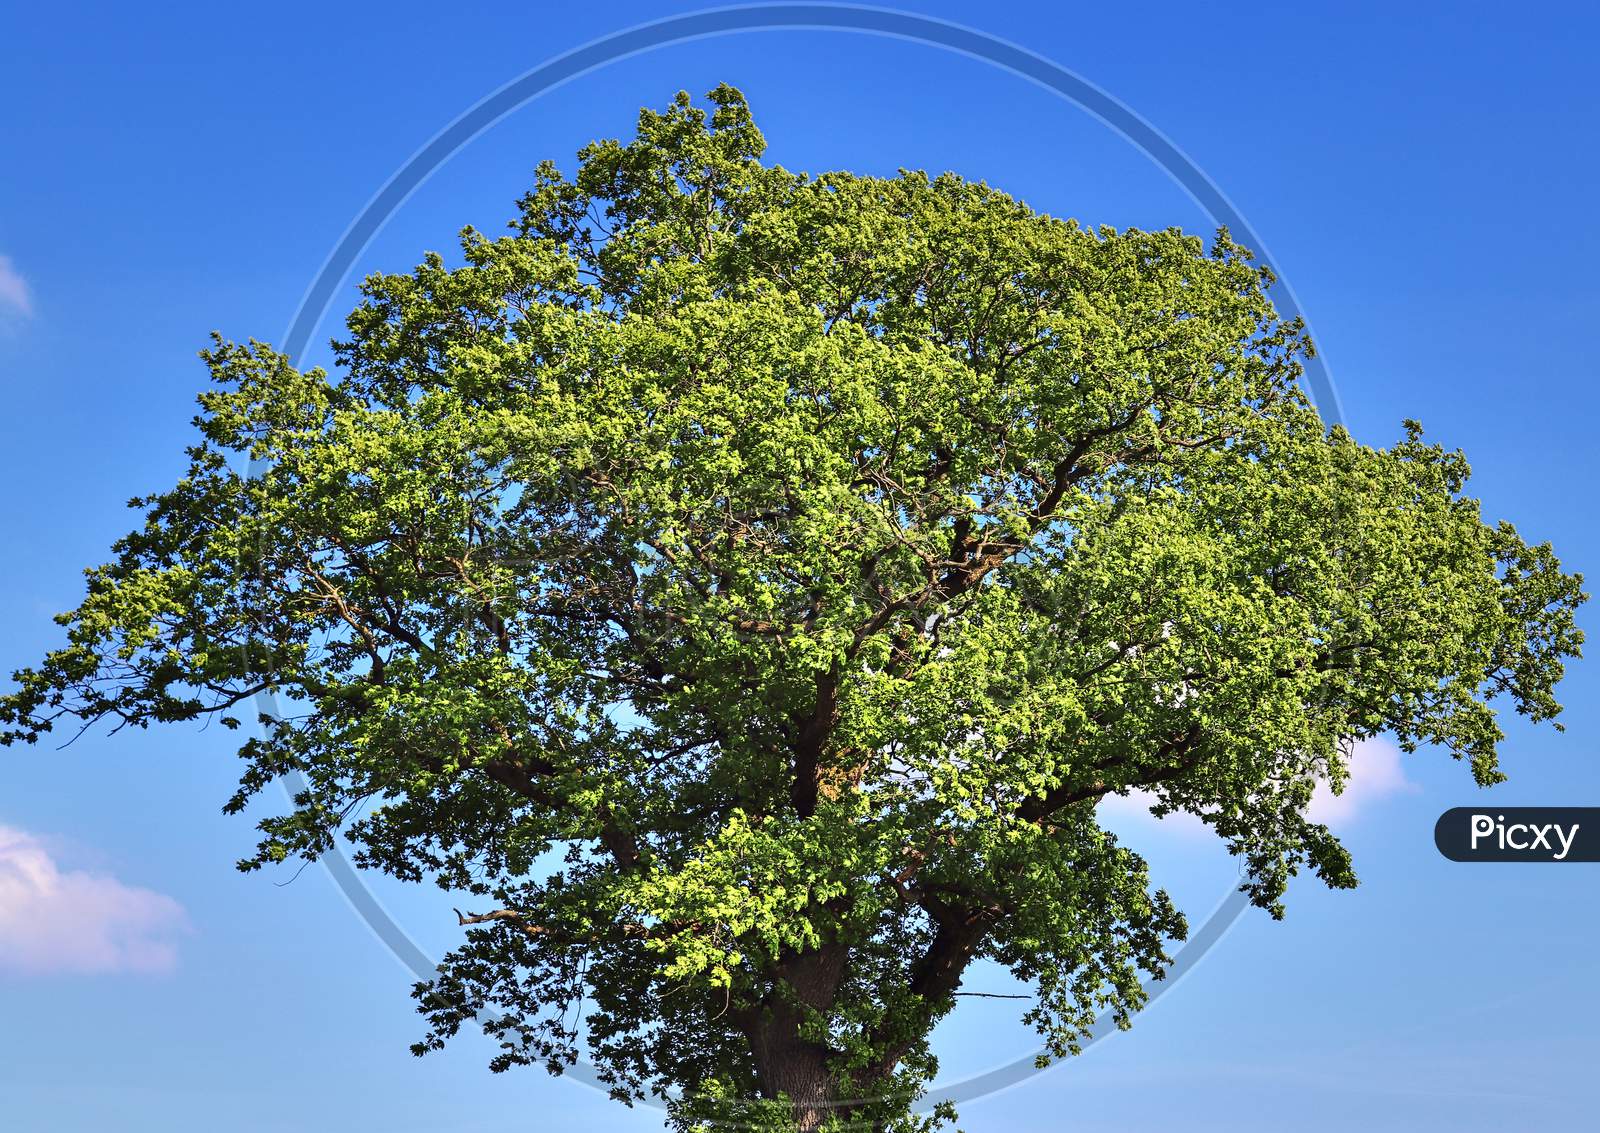 Beautiful tree crowns with leaves and fine branches in front of a blue sky